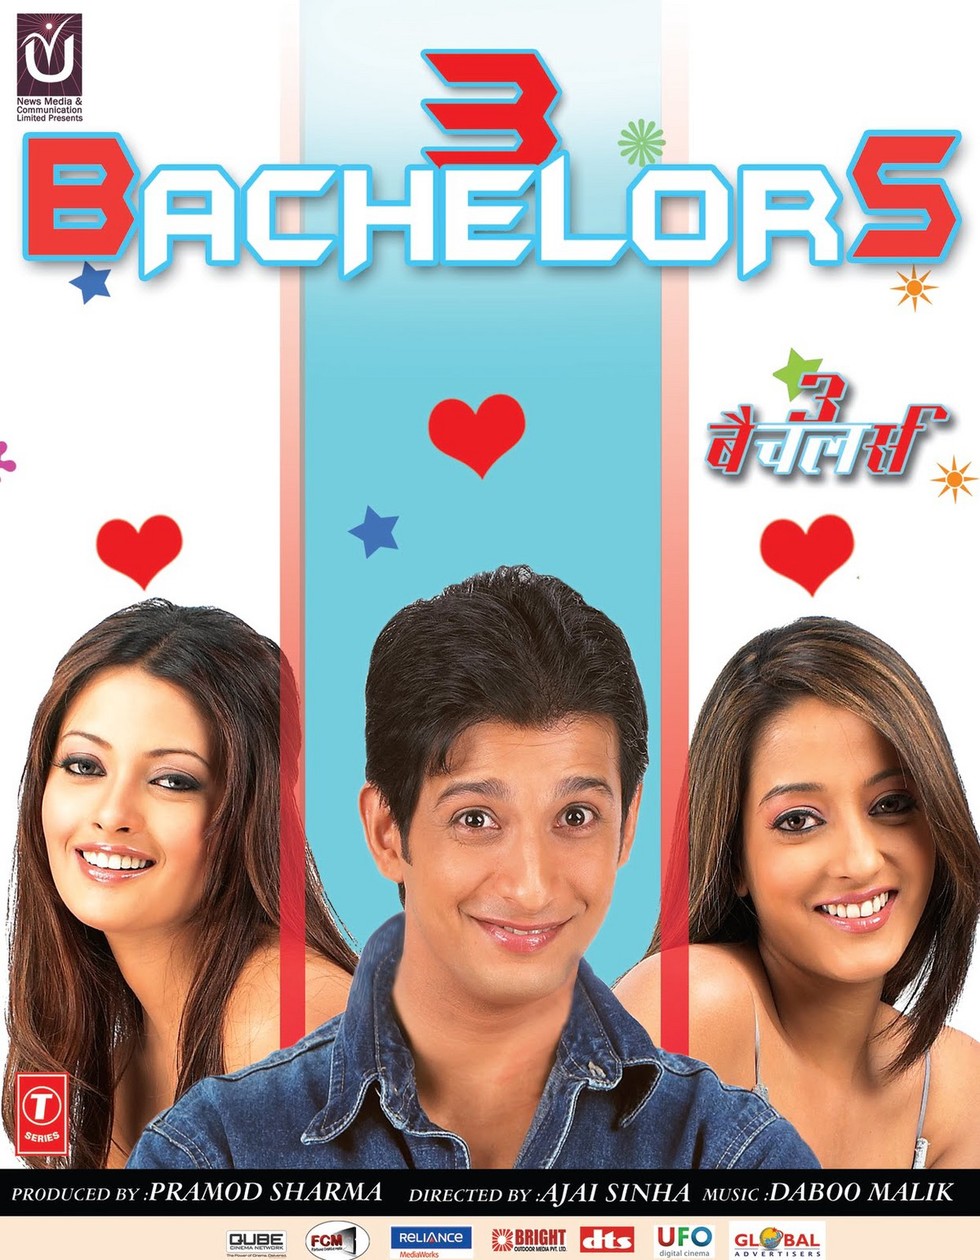 3 Bachelors - Movie Poster #1 (Large)